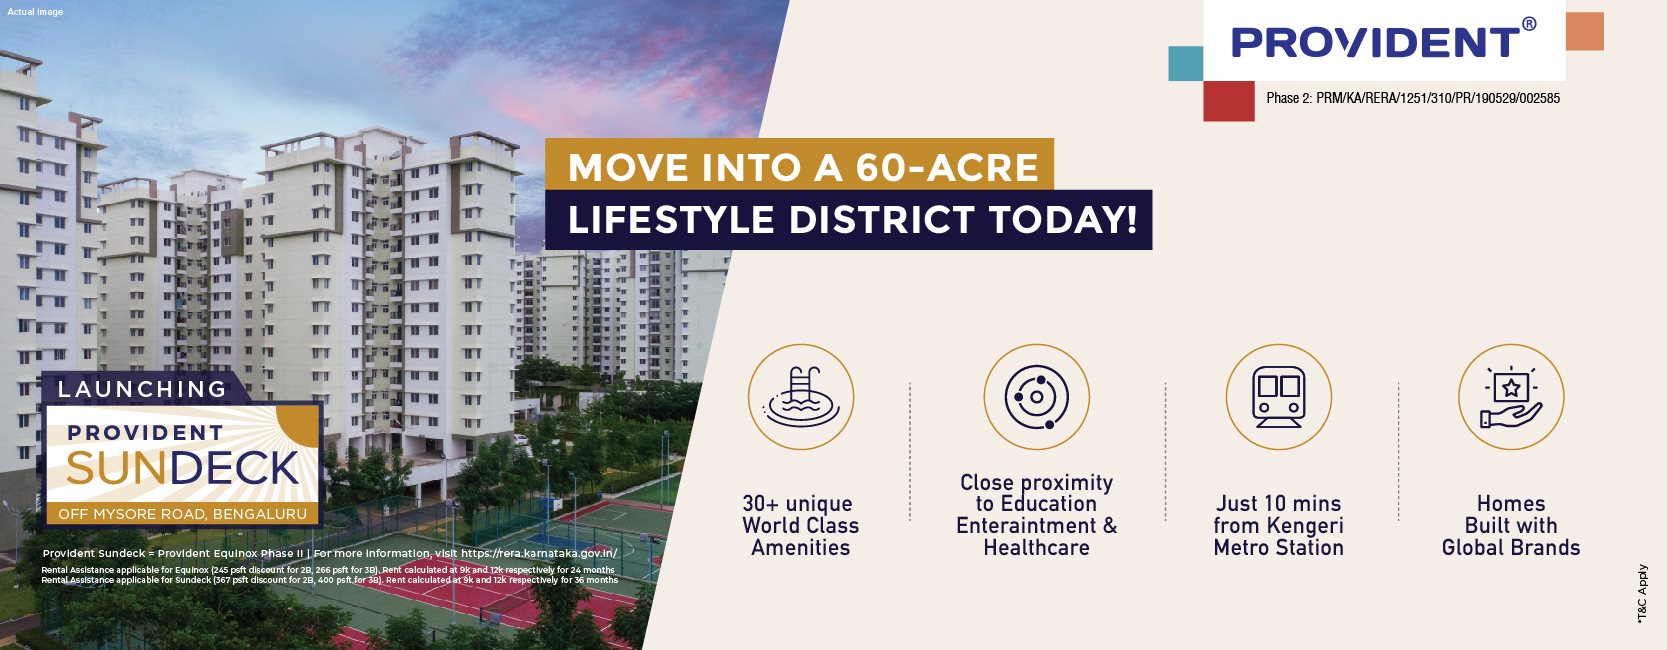 Move into a 60-acre lifestyle district today at Provident Sundeck, Bangalore Update